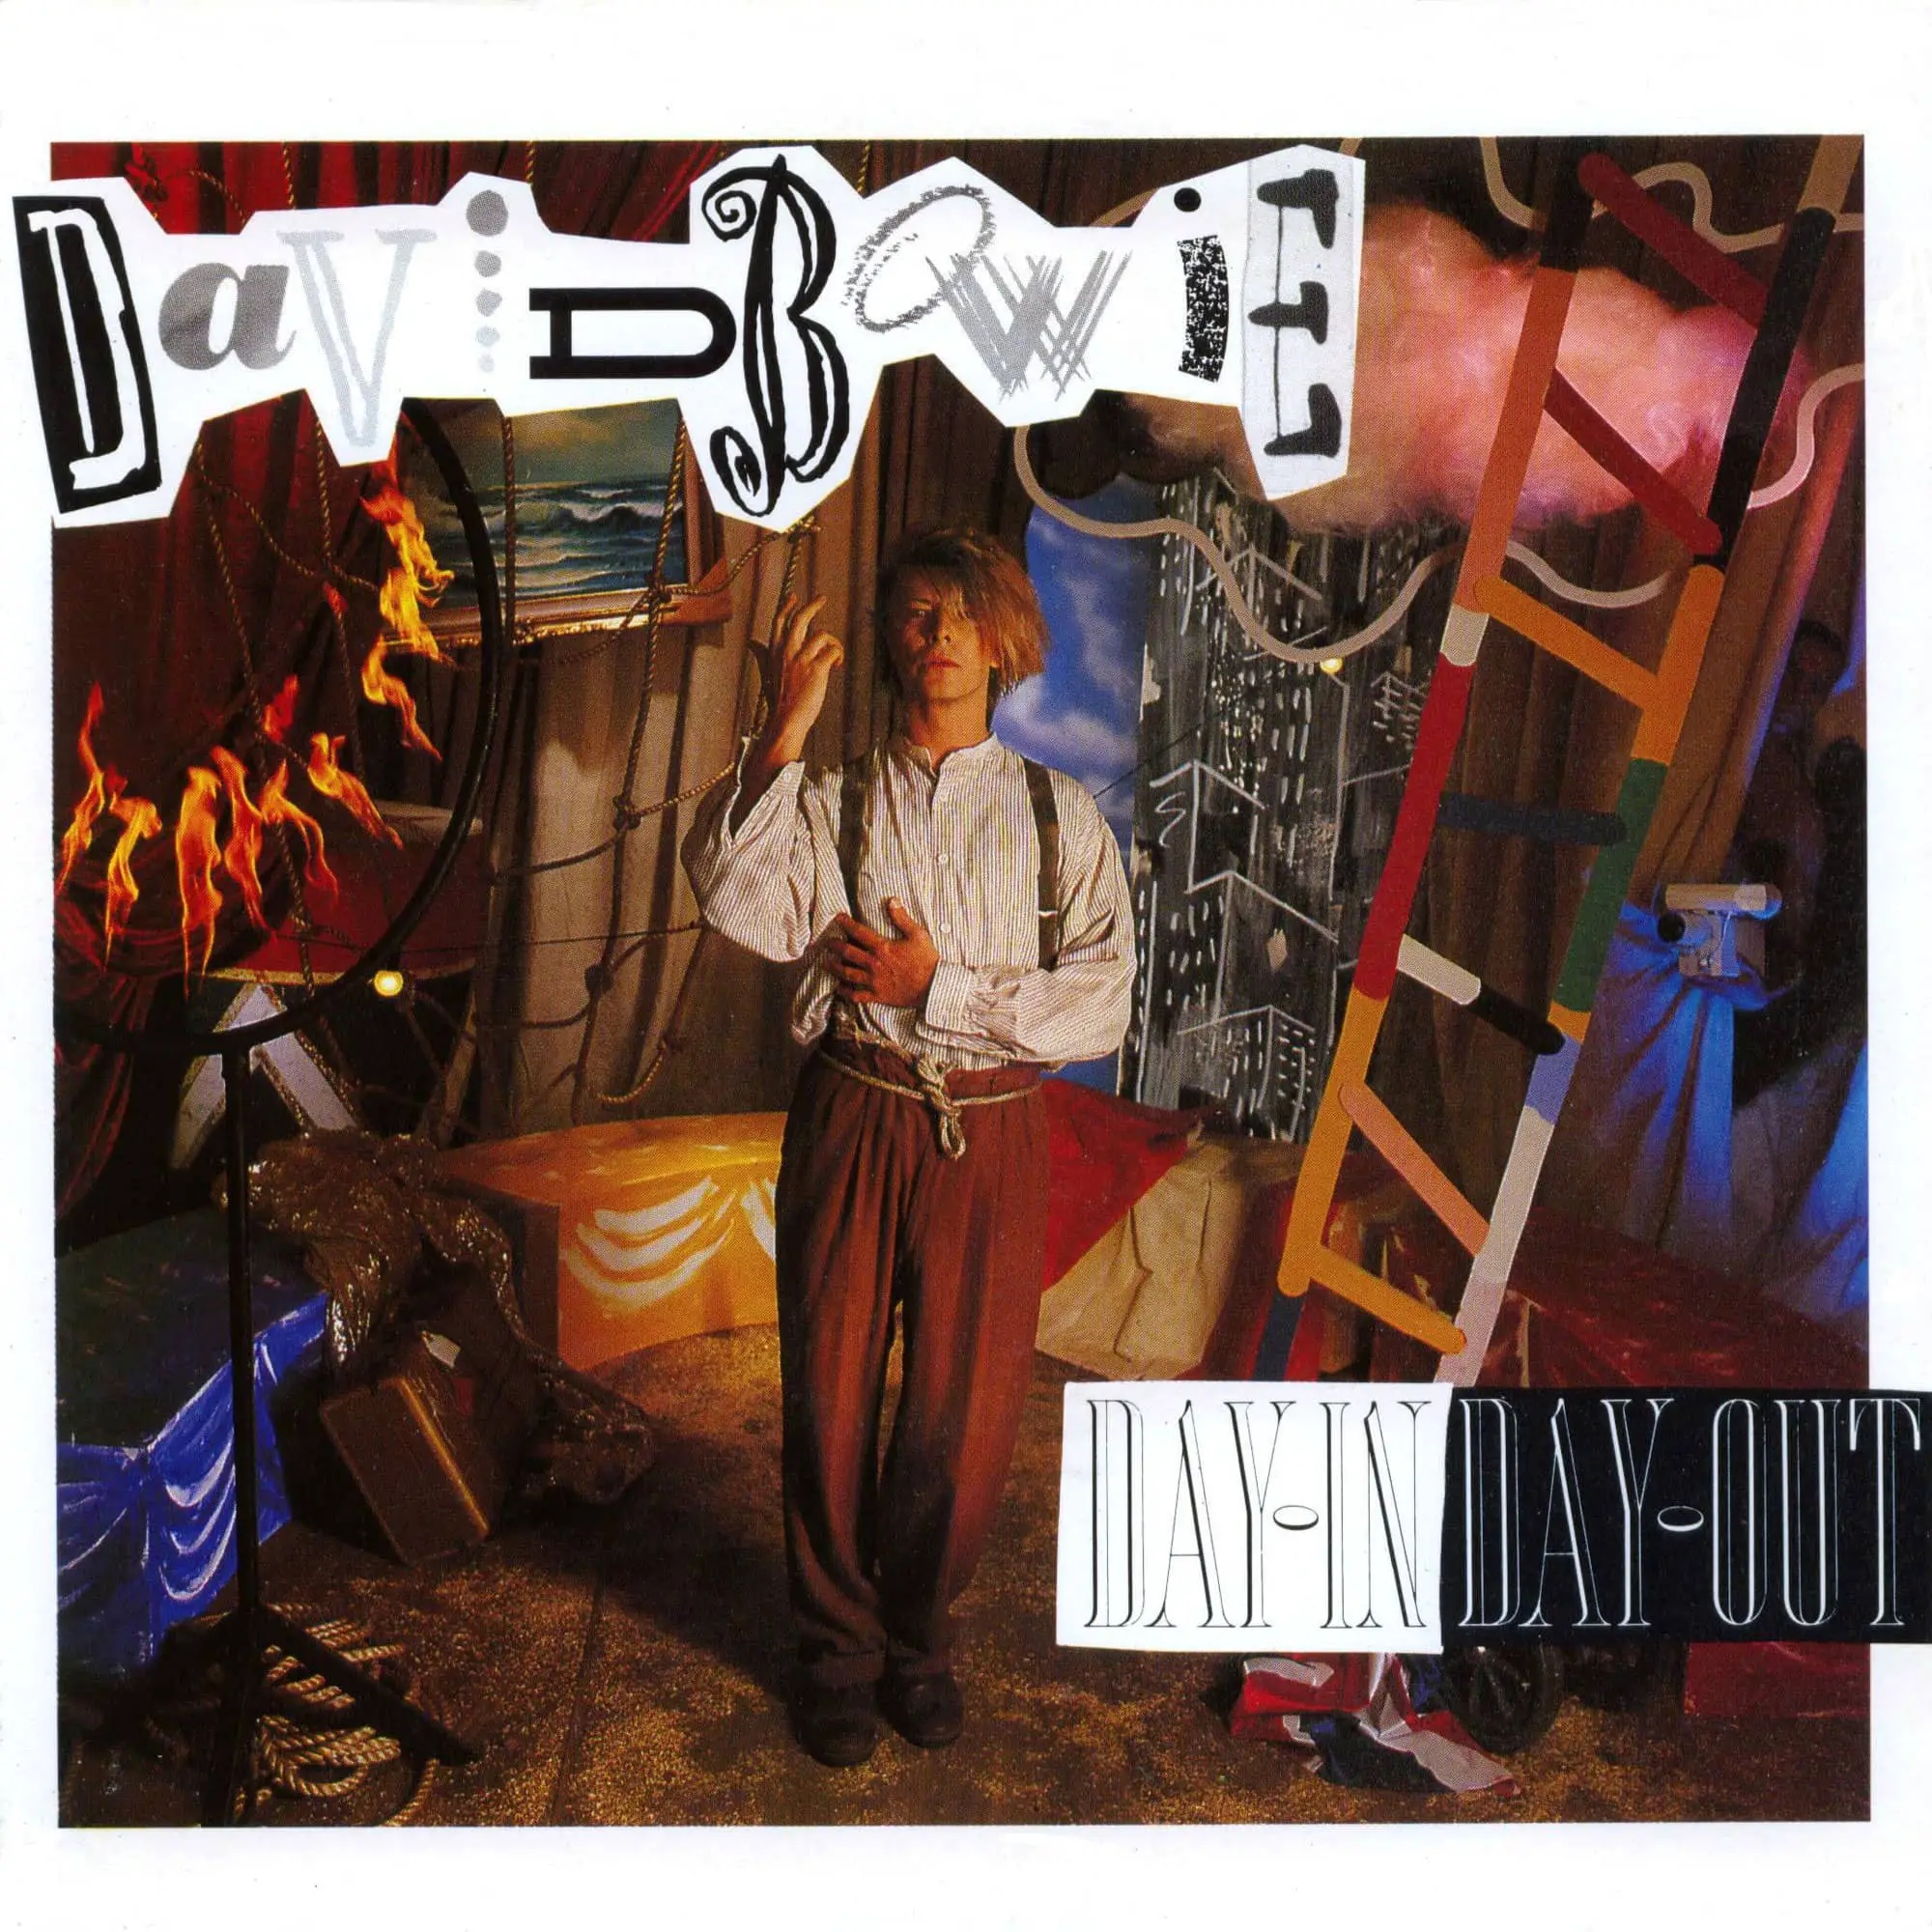 David Bowie — Day-In Day-Out cover artwork